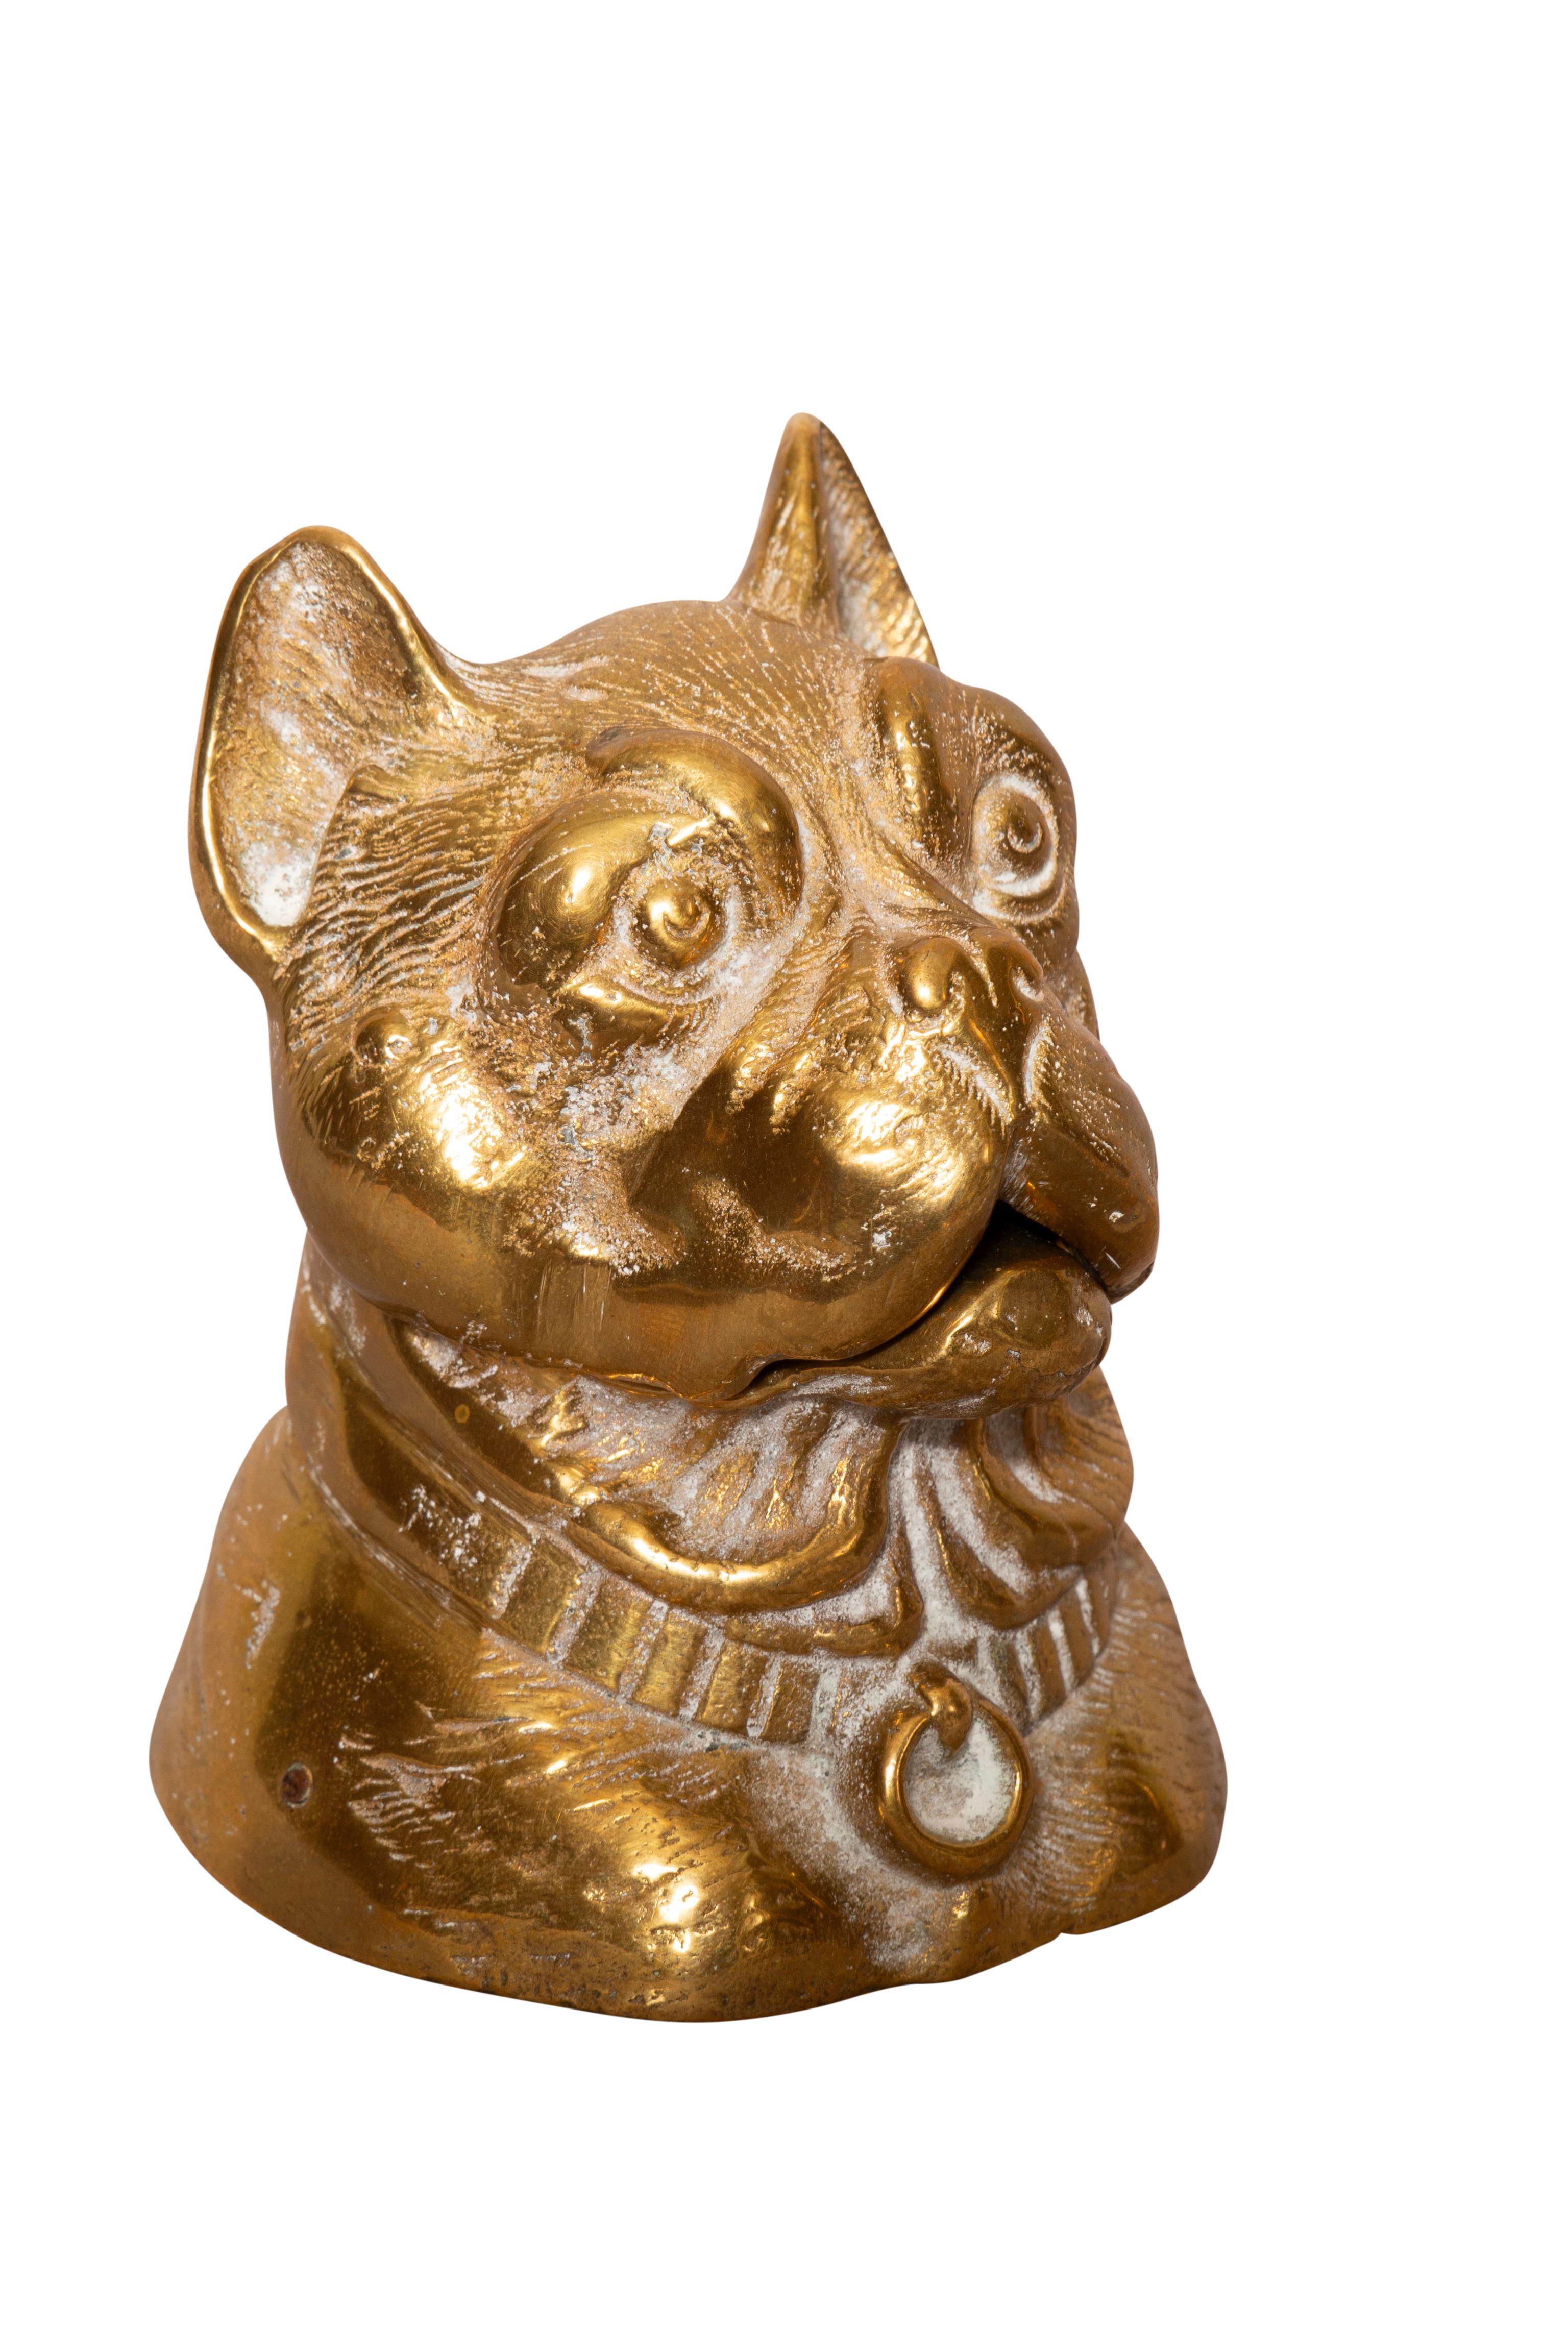 Cast terrier with hinge lid opening to an inkwell. From the estate of the founder of Yankee Candle Co.